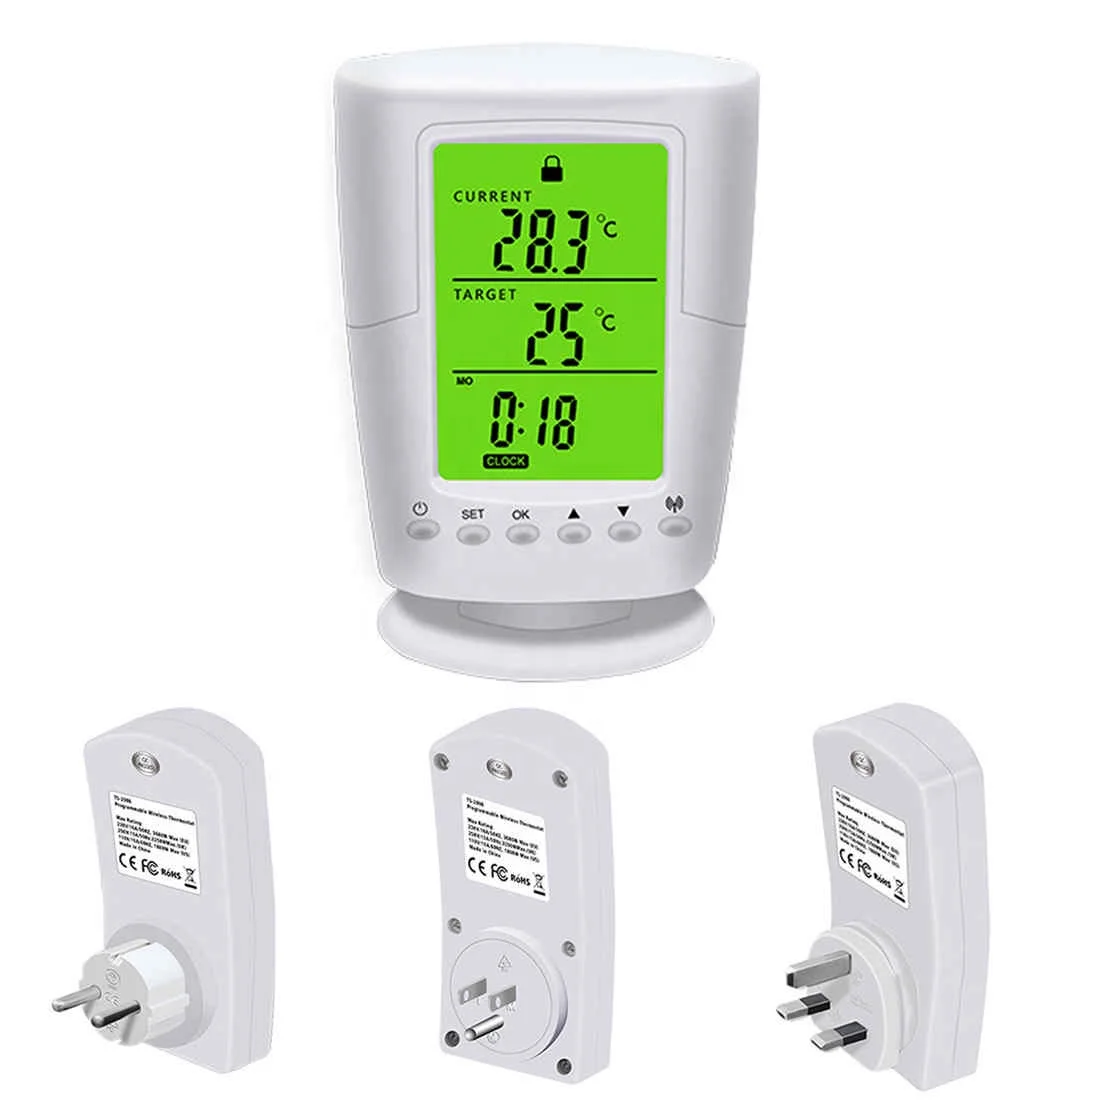 LCD Display Heating Programming Thermostat Temperature Controller+Remote Control